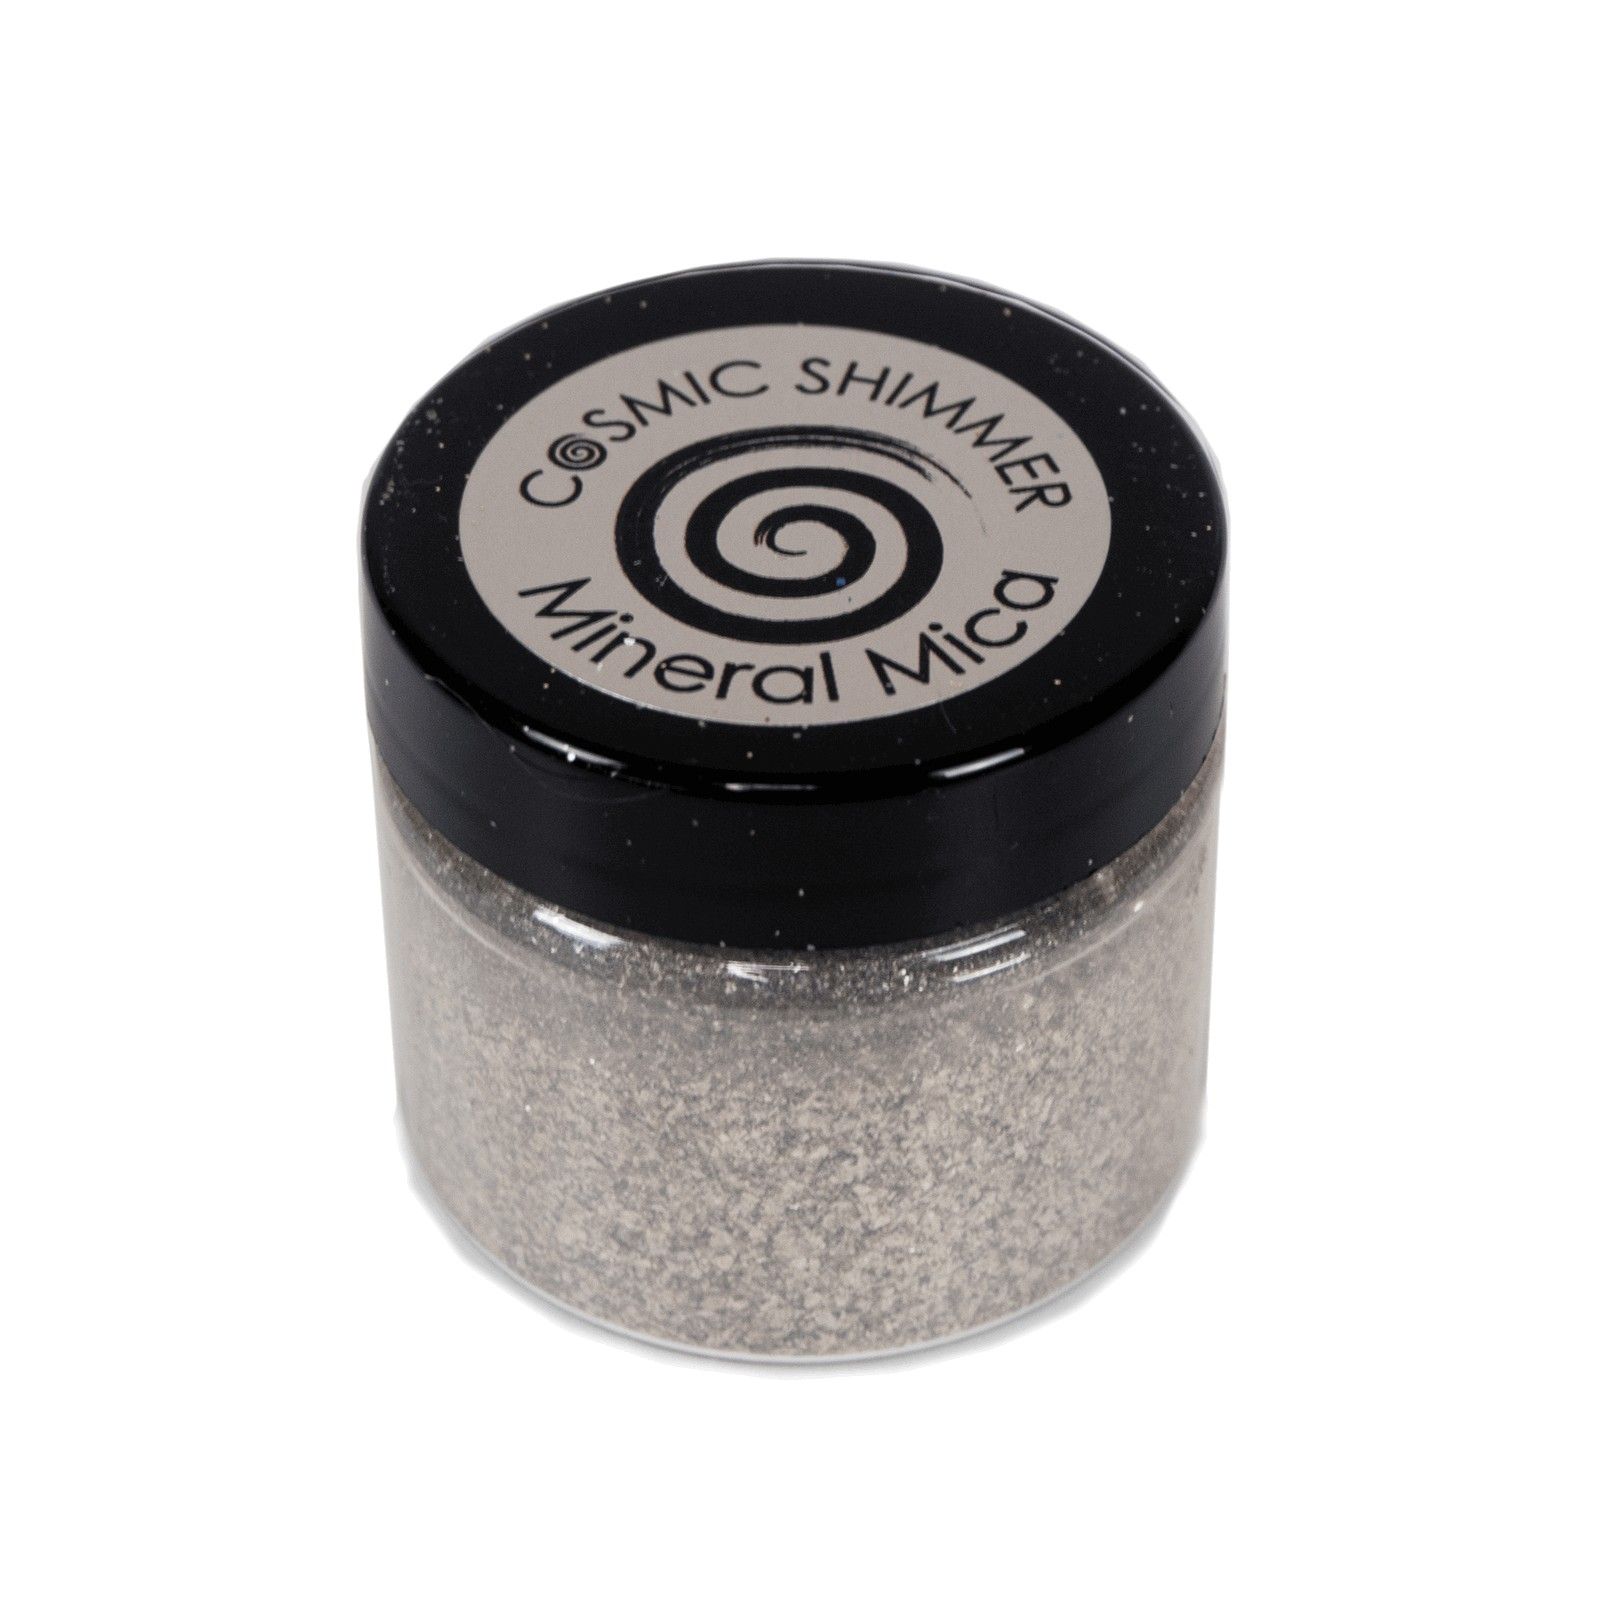 Cosmic Shimmer • Mineral Mica Bianco Silver 50ml